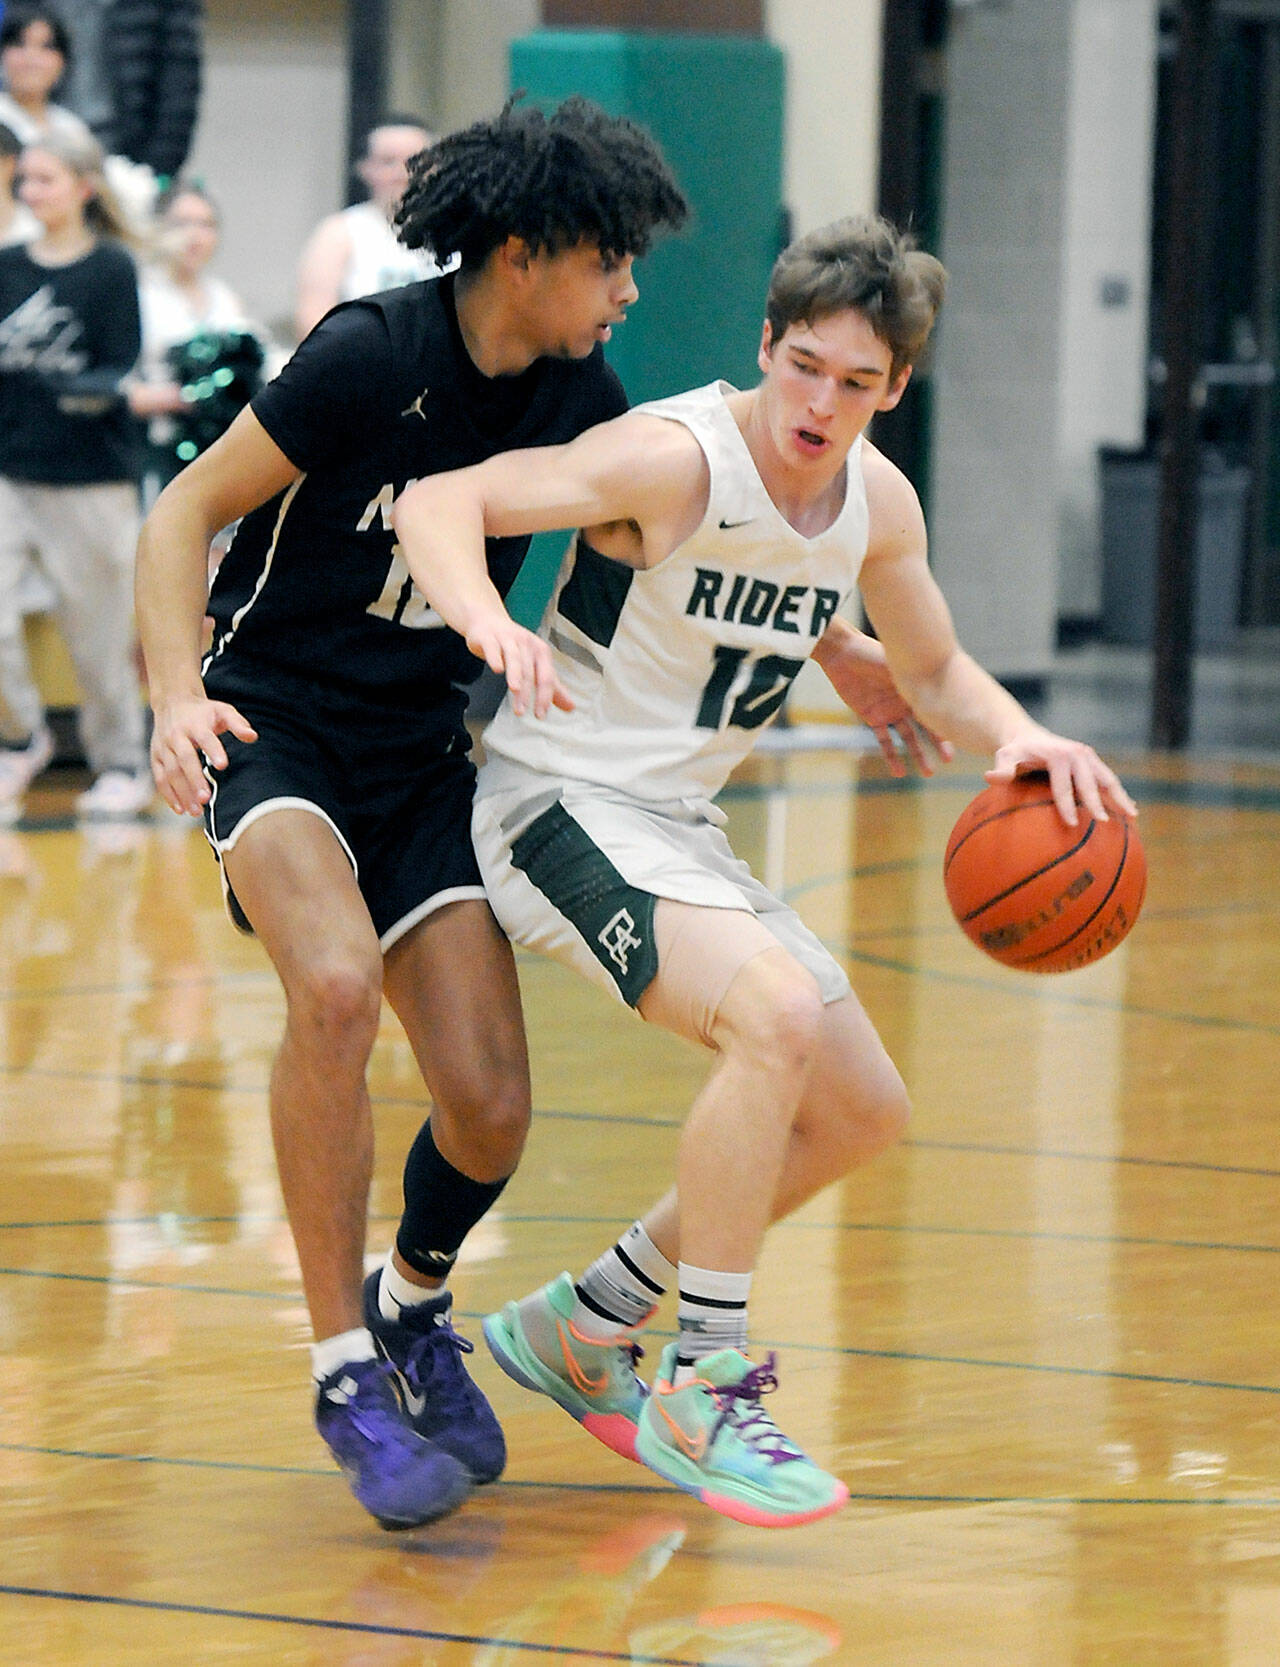 KEITH THORPE/PENINSULA DAILY NEWS Port Angeles’ Josiah Long, right, pushes off the defense of North Kitsap’s Harry Davies during Thursday’s game at Port Angeles High School.